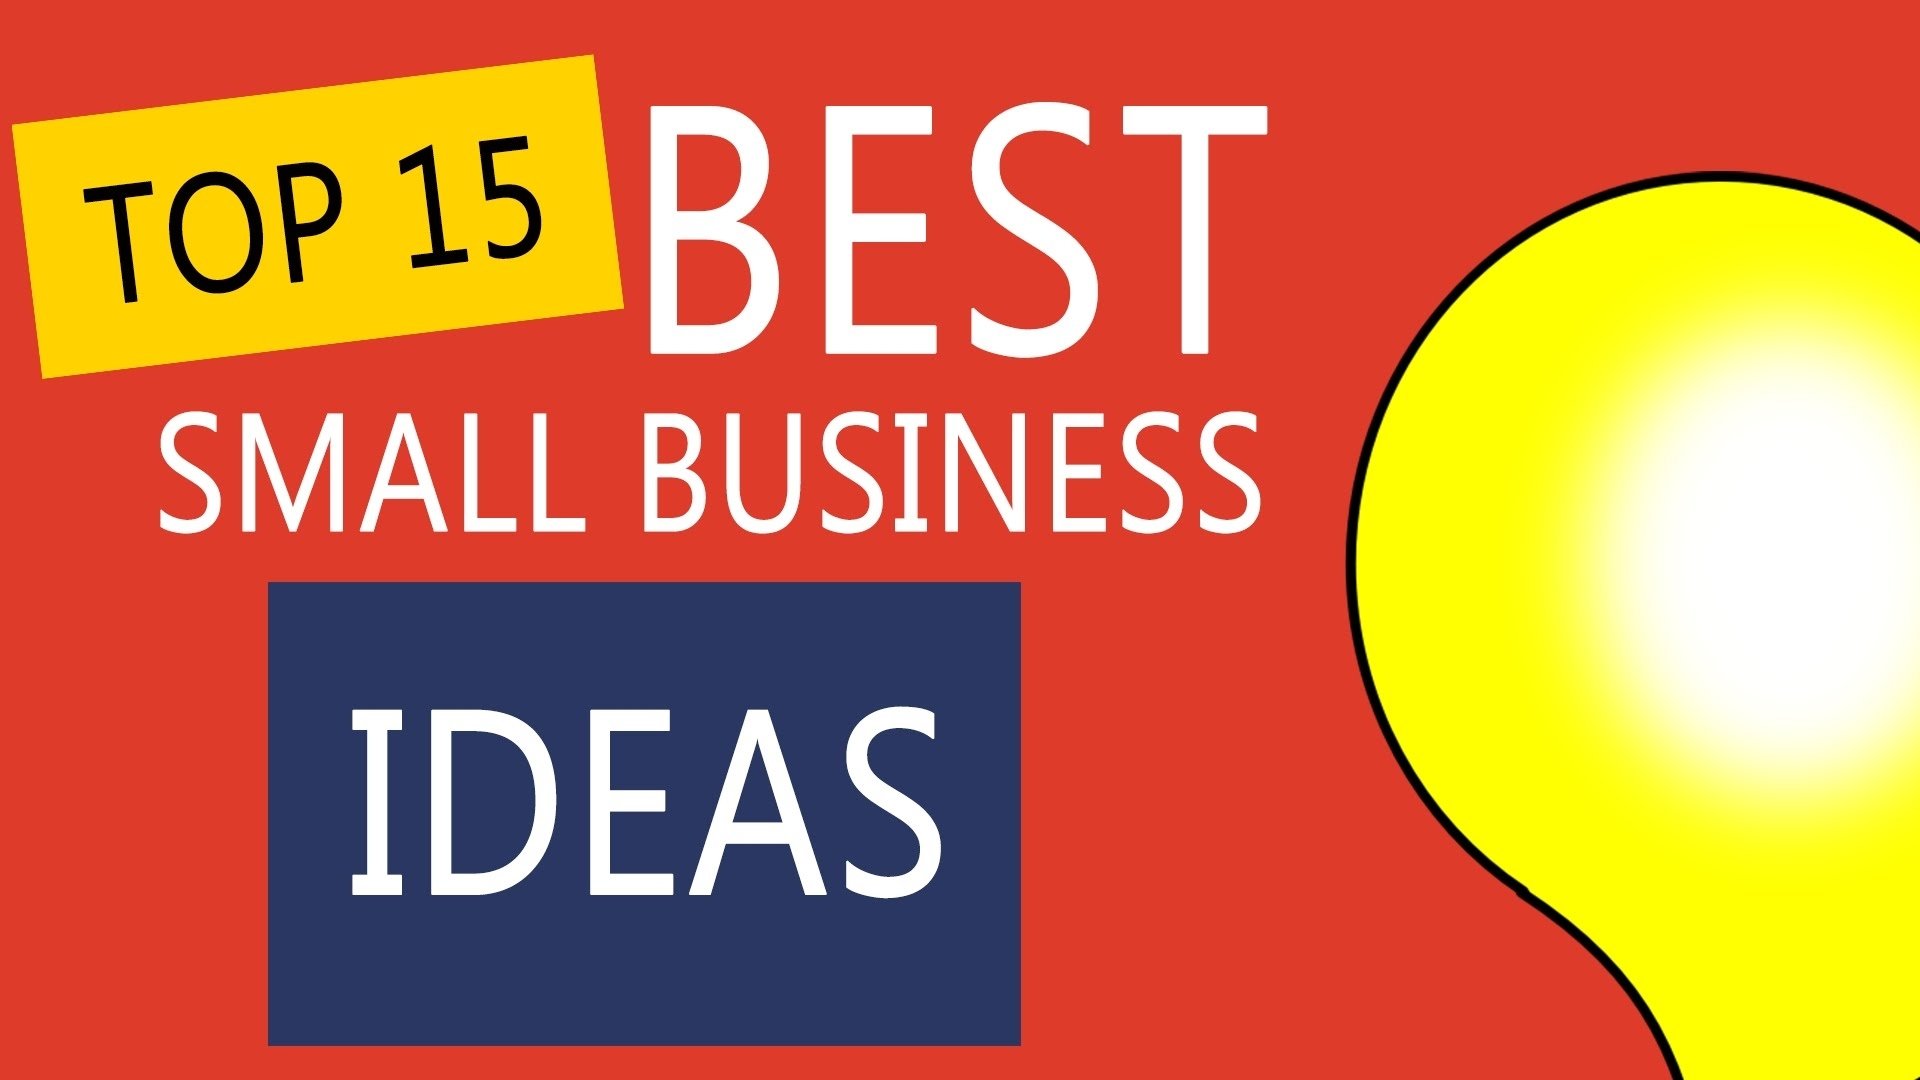 10 Famous Best Ideas For Small Business top 15 best small business ideas to start your own business youtube 5 2023